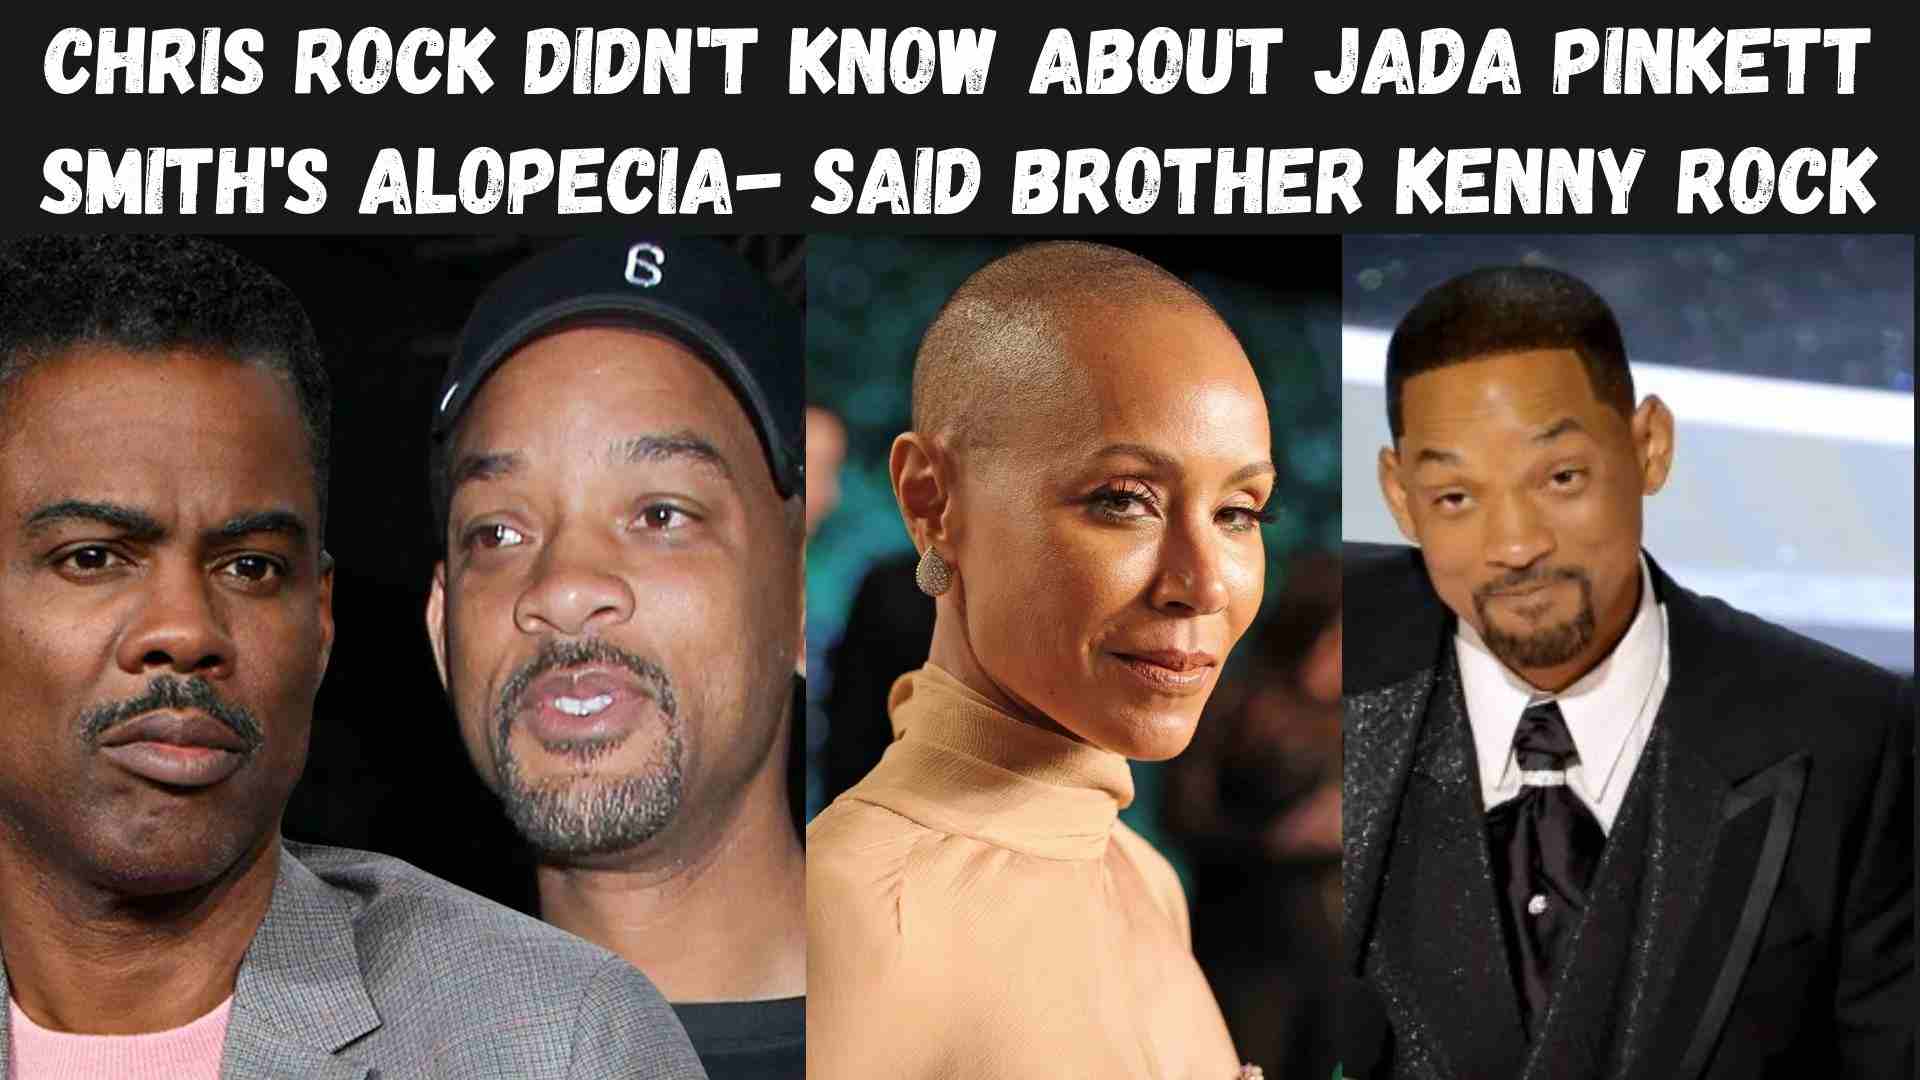 Chris Rock didn't know about Jada Pinkett Smith's Alopecia- said brother Kenny Rock wallpaper and images